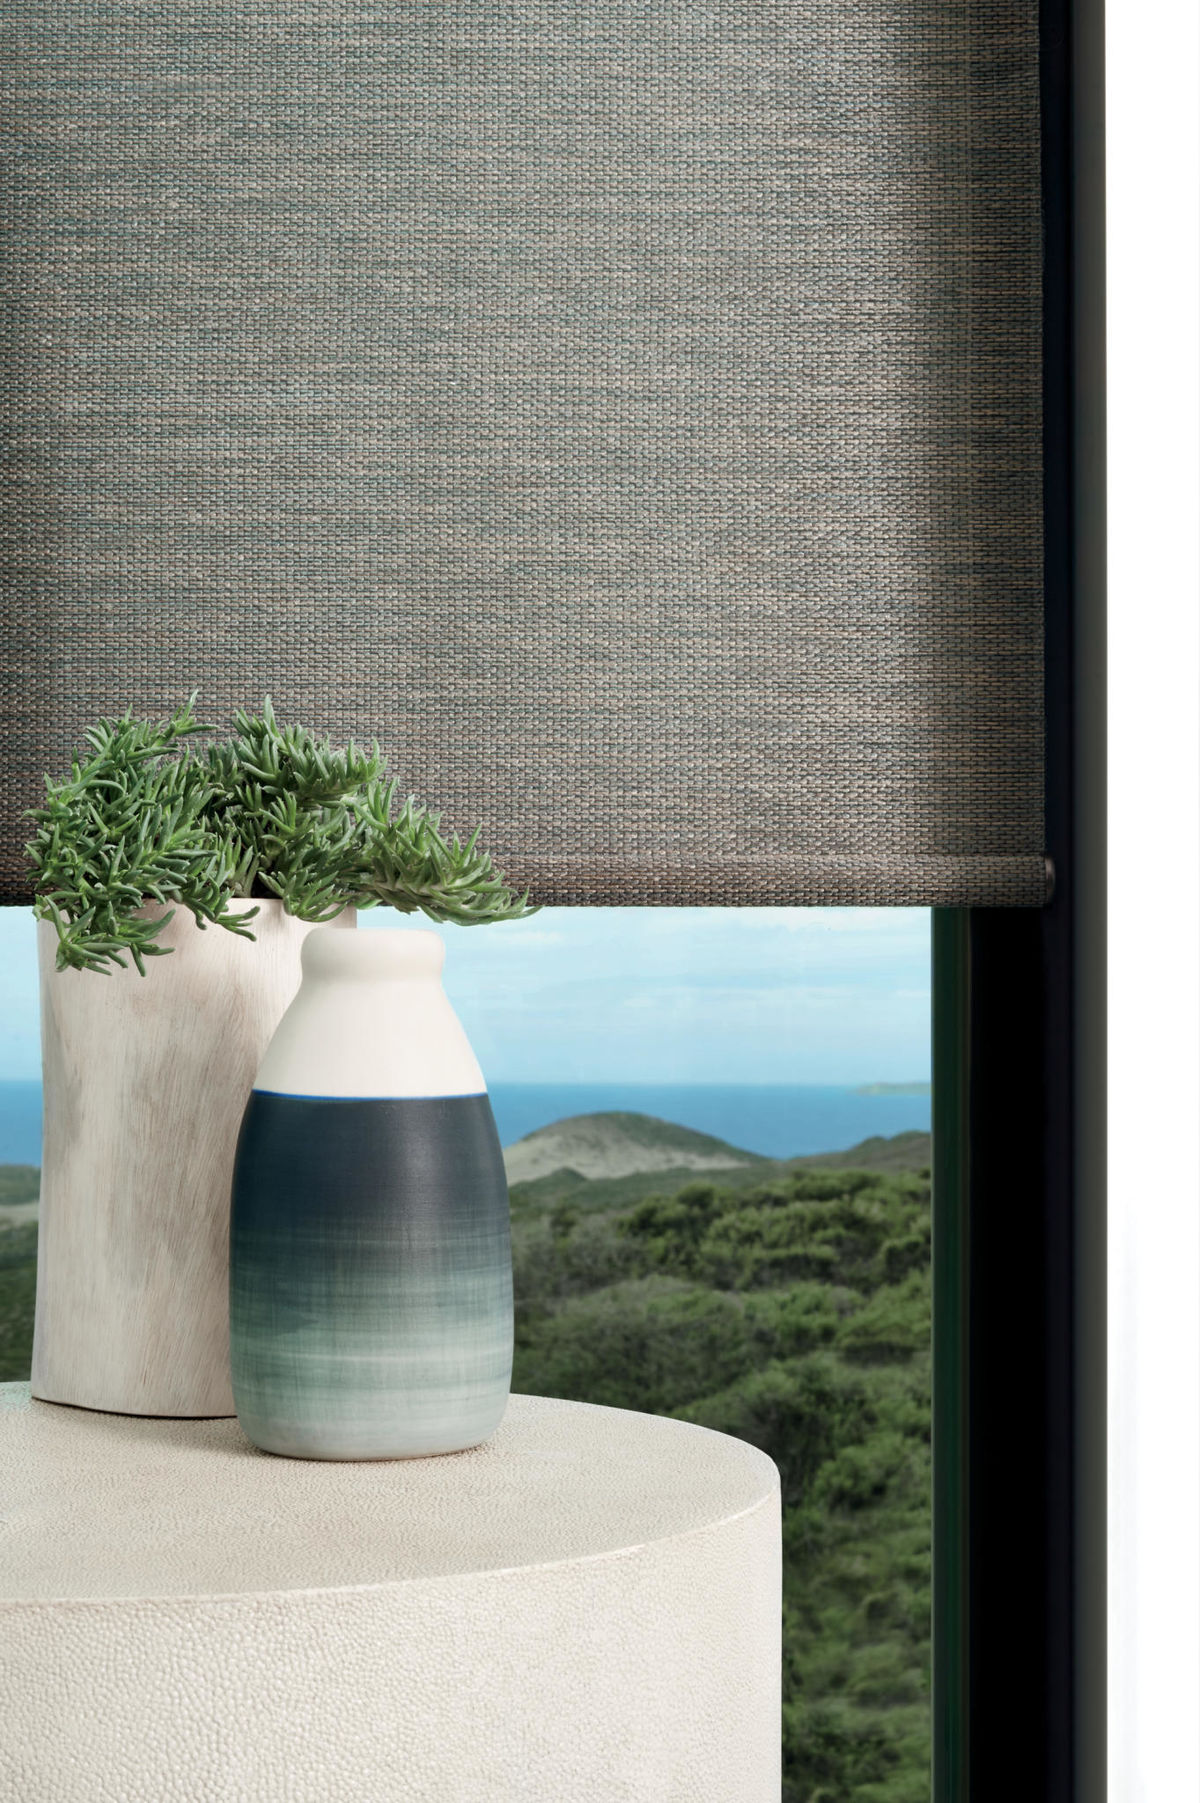 Alustra® Woven Textures®